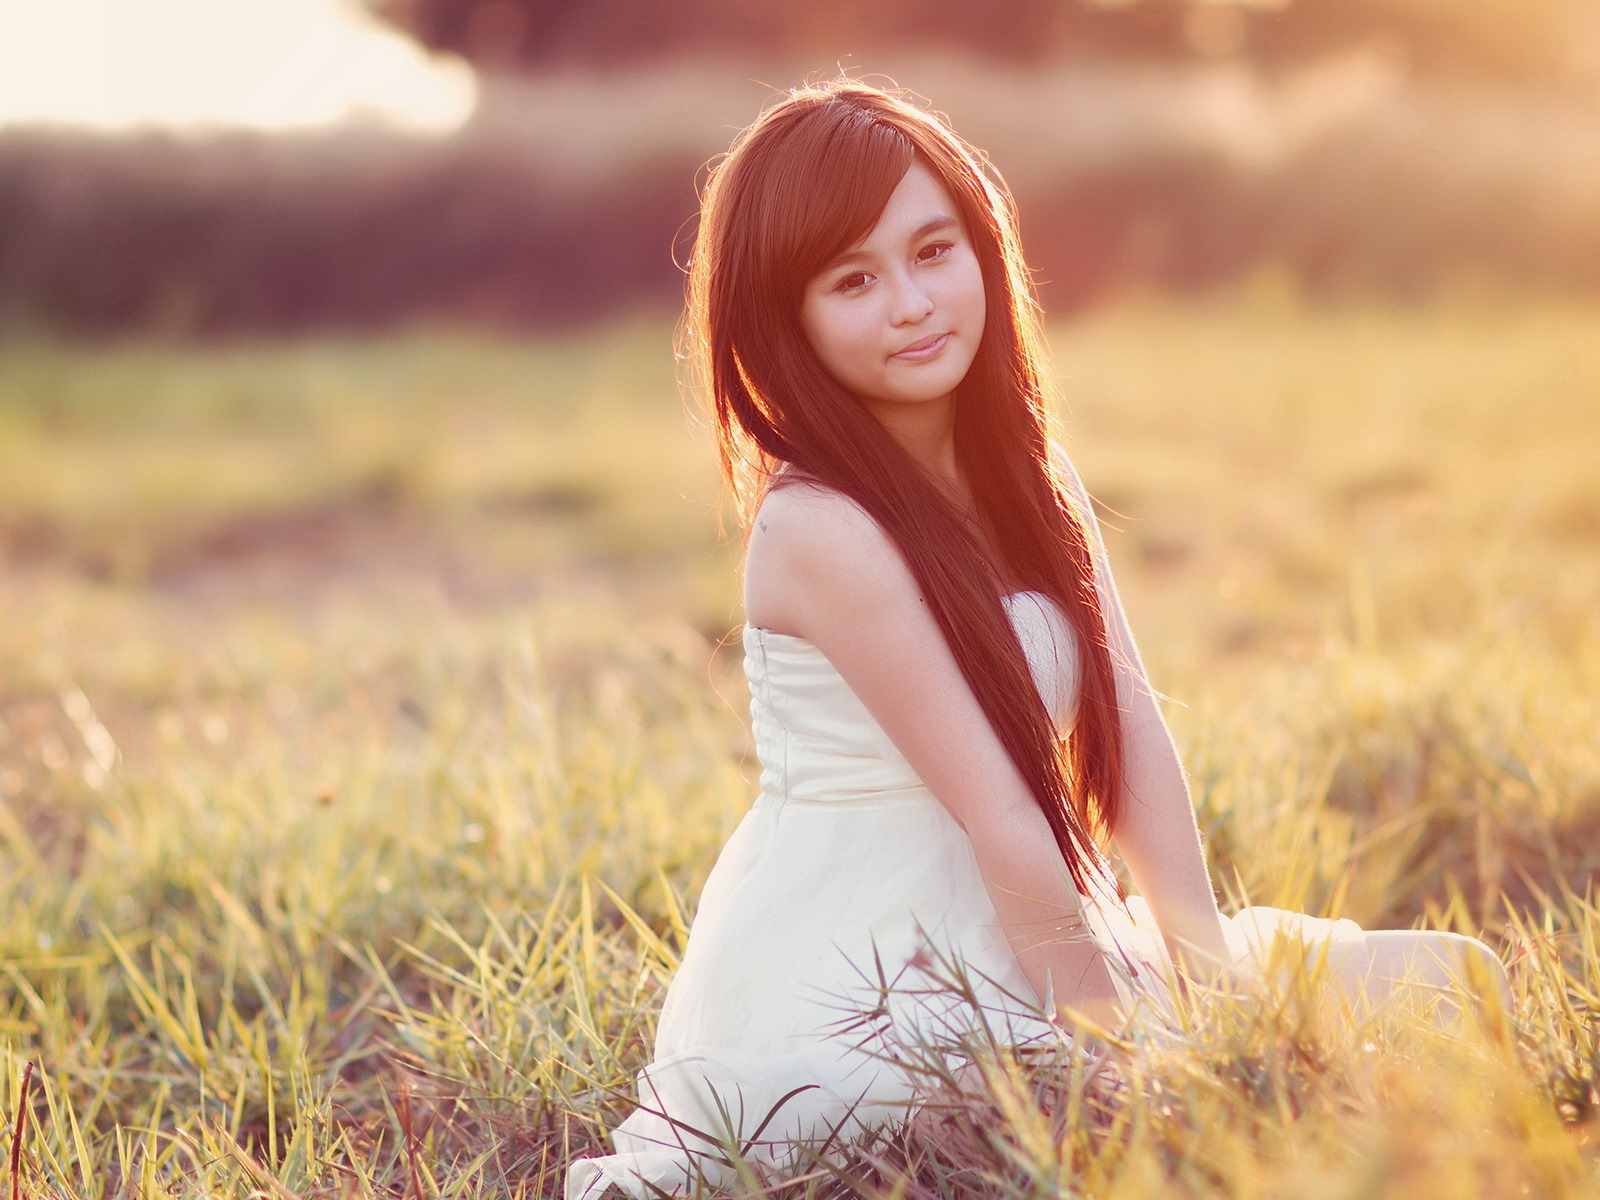 Pure and lovely young Asian girl HD wallpapers collection (5) #29 - 1600x1200